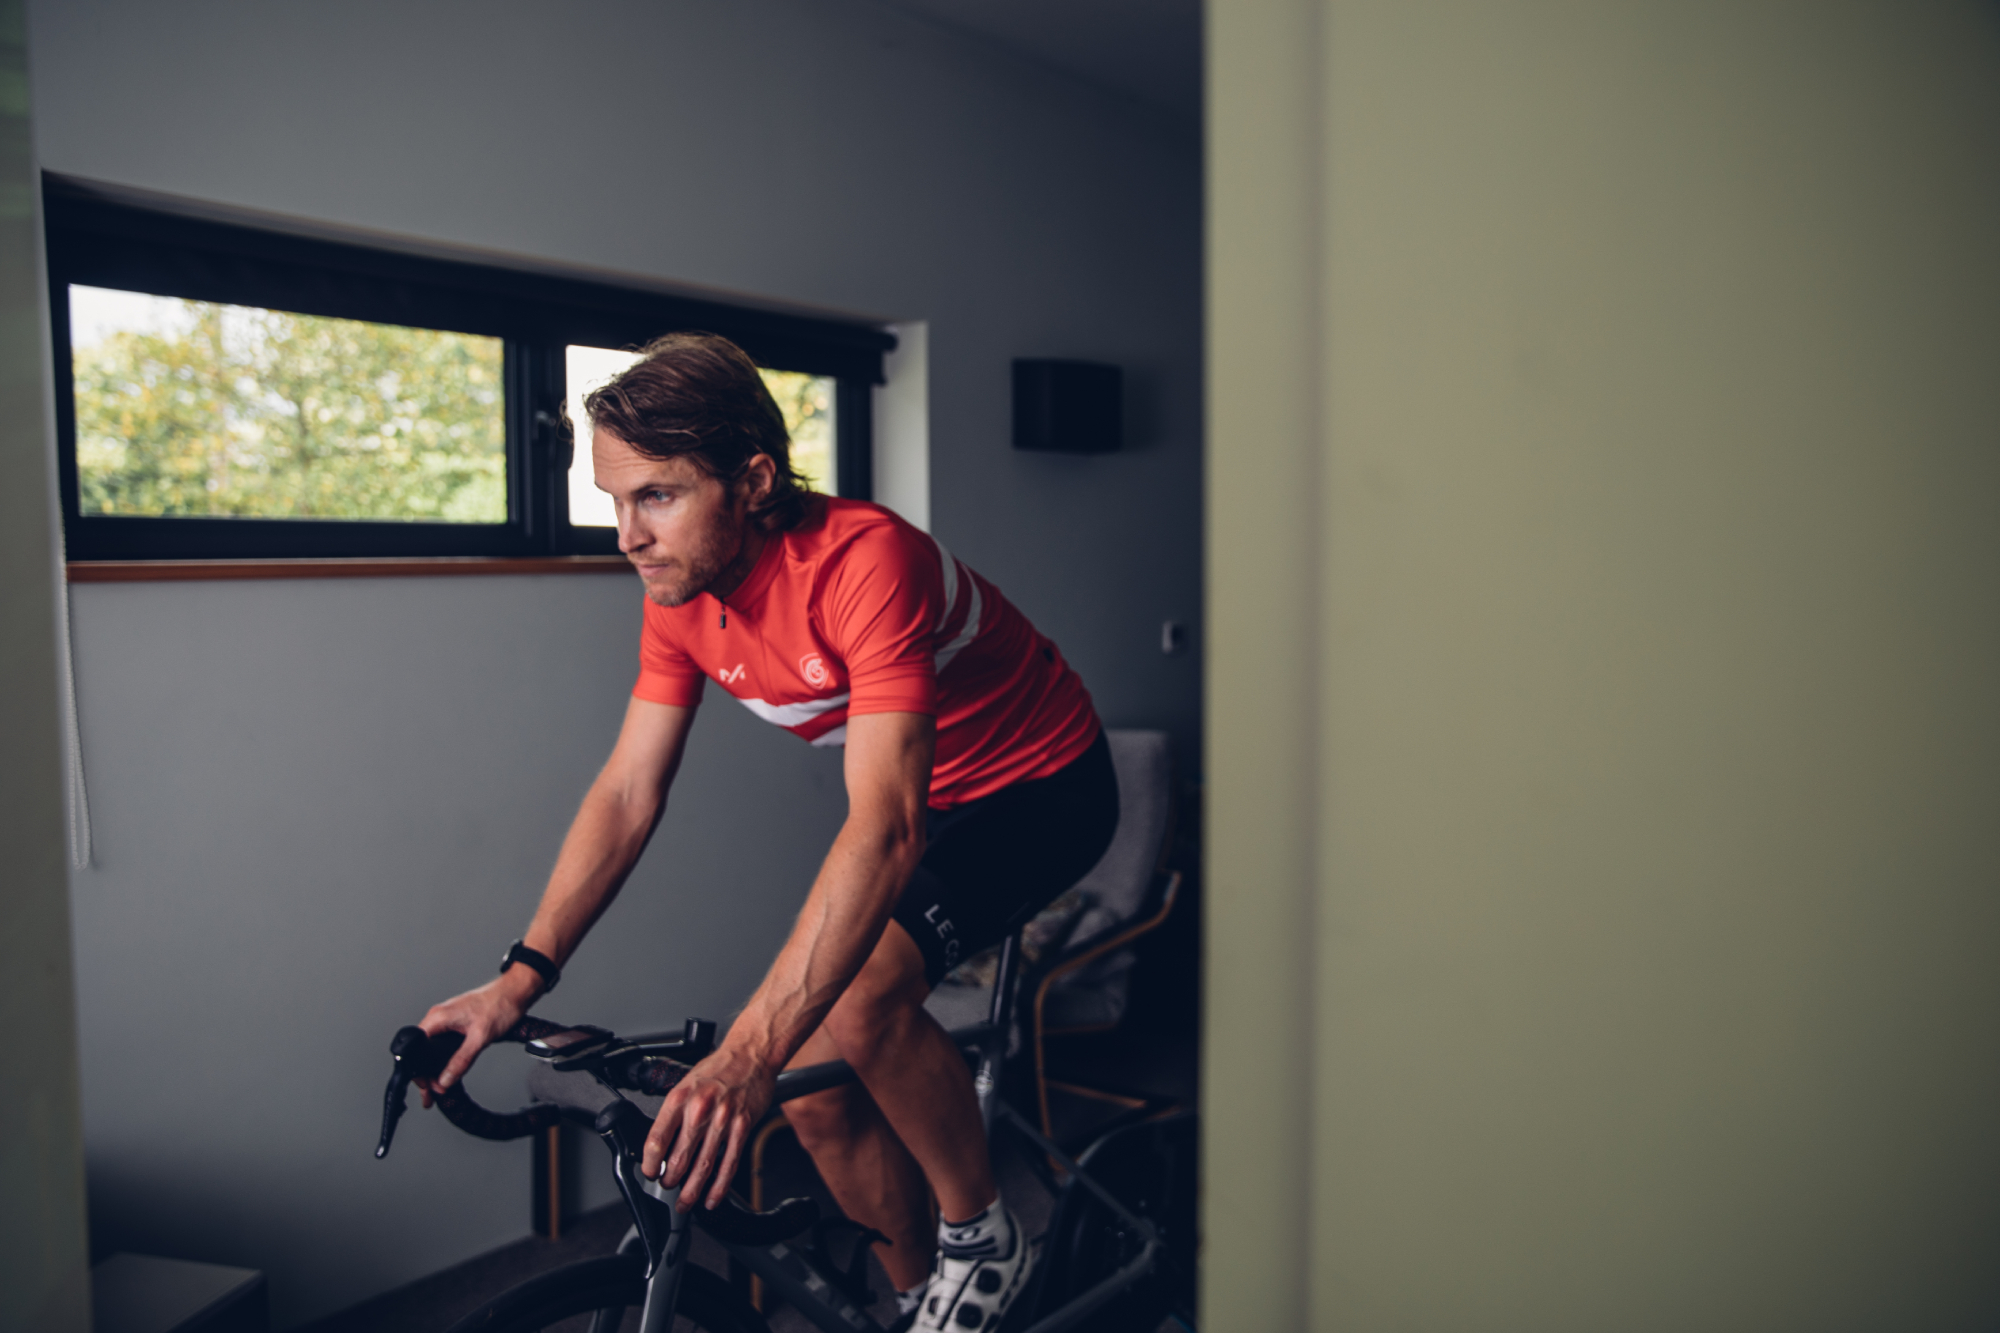 Image shows a rider completing a beginner's cycling training plan for fitness gains